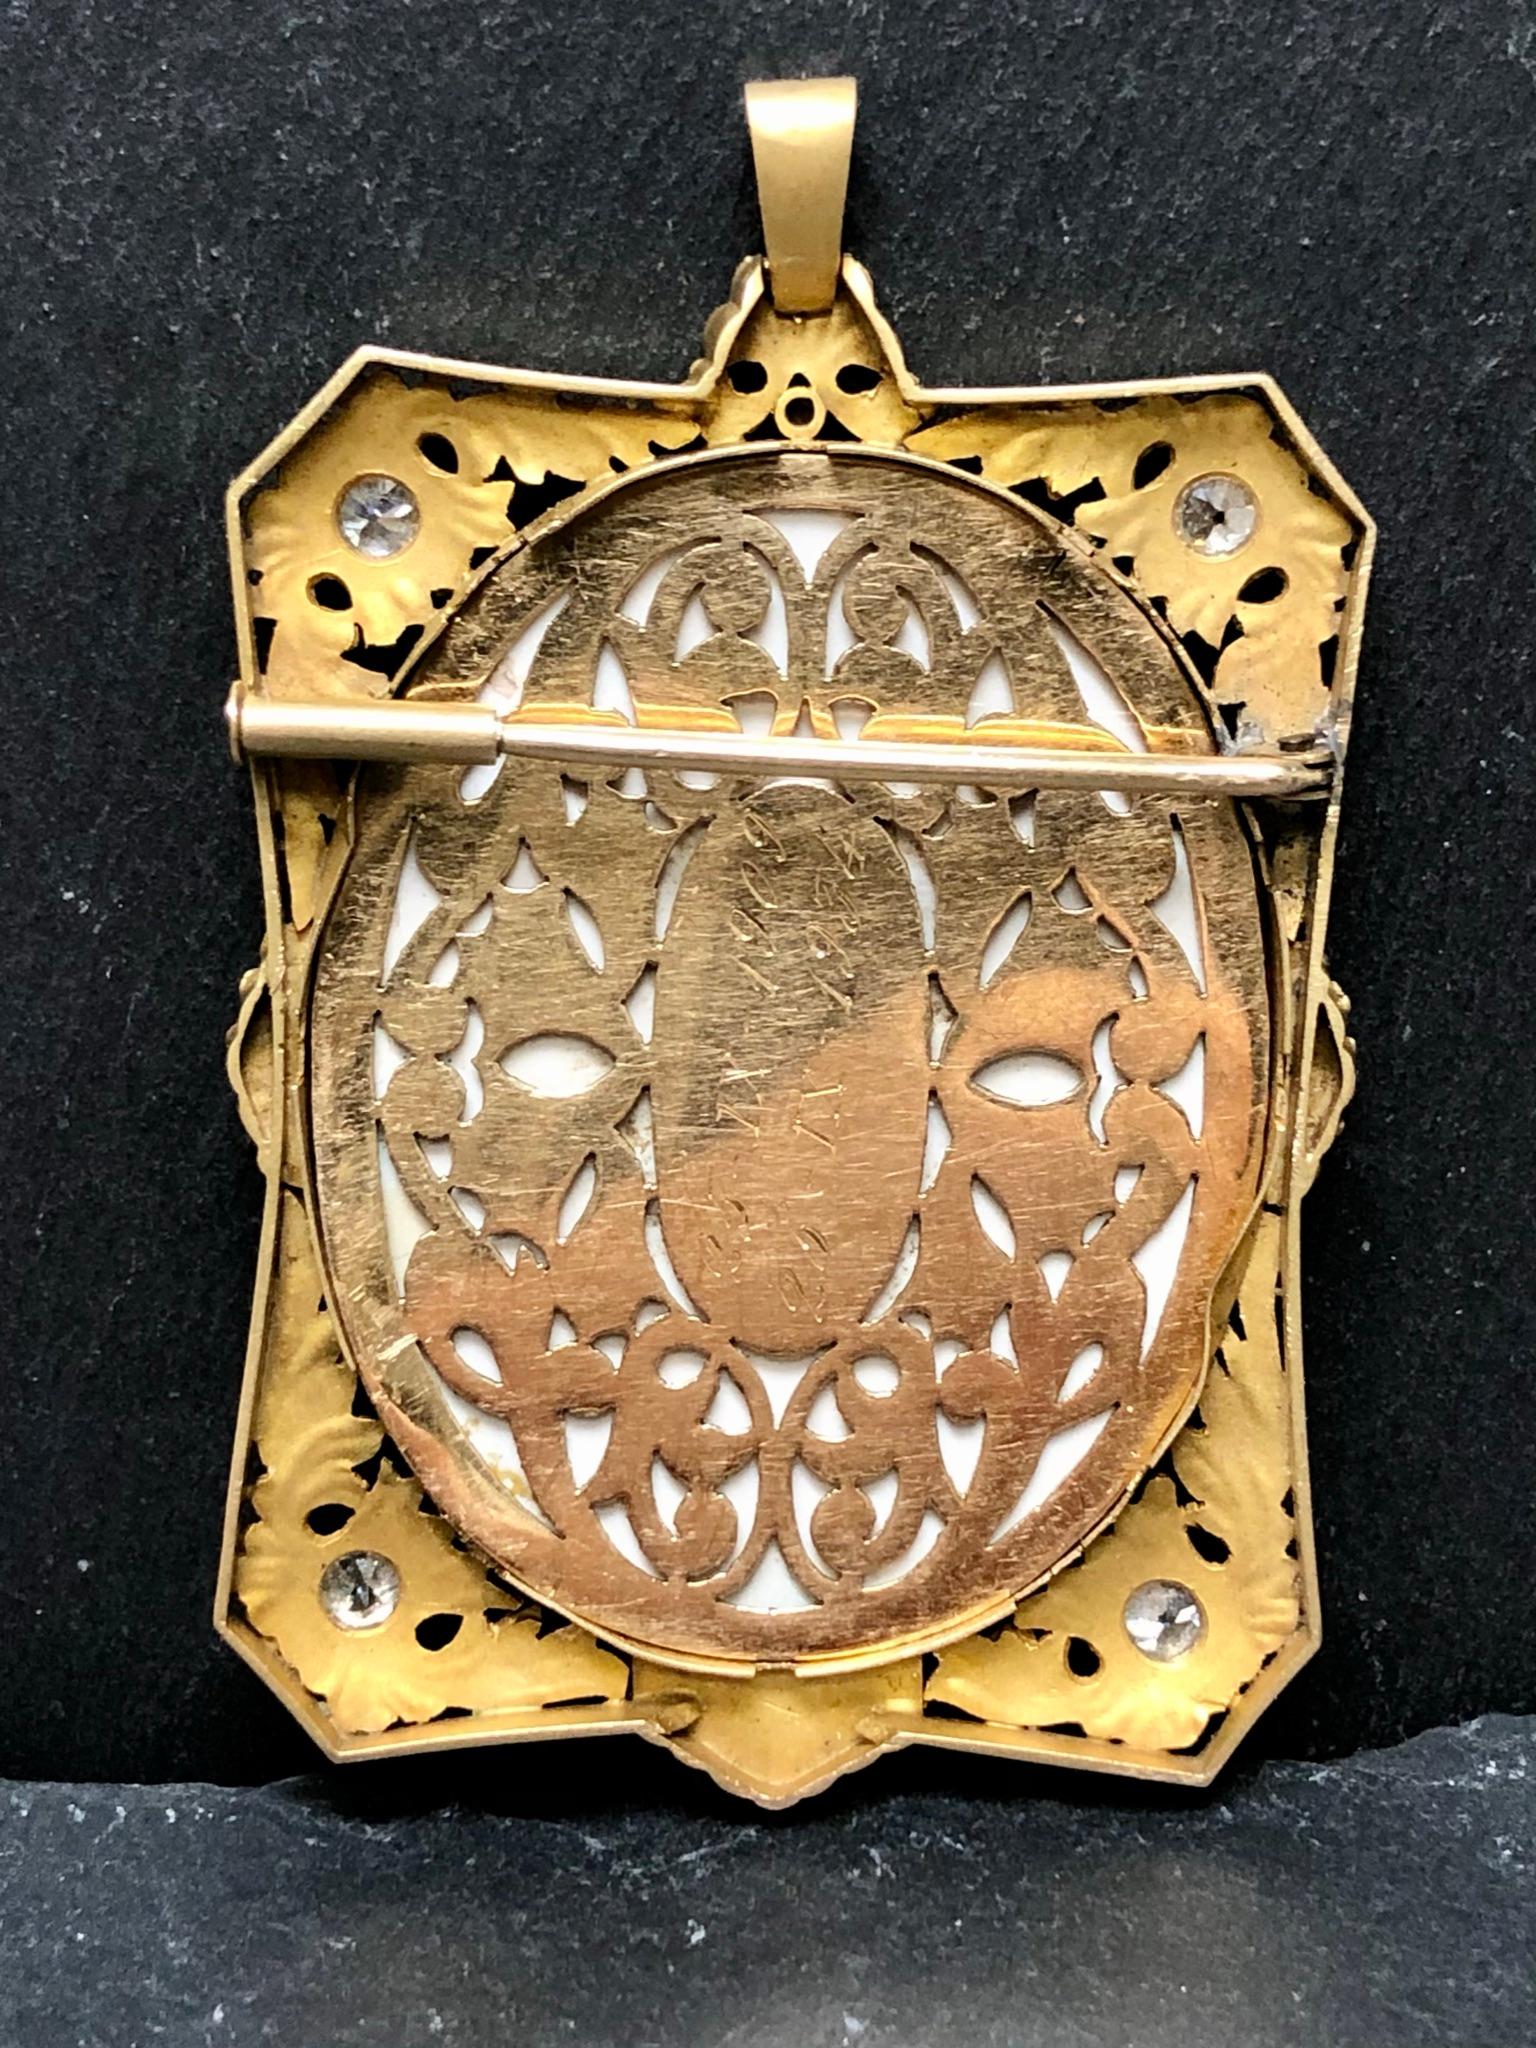 This exquisite piece is unlike anything we have ever owned or even seen. It has been crafted in 18K pink and yellow gold as well as platinum and lightly dusted in a green enameling. The hand-wrought detail is absolutely incredible as well as the